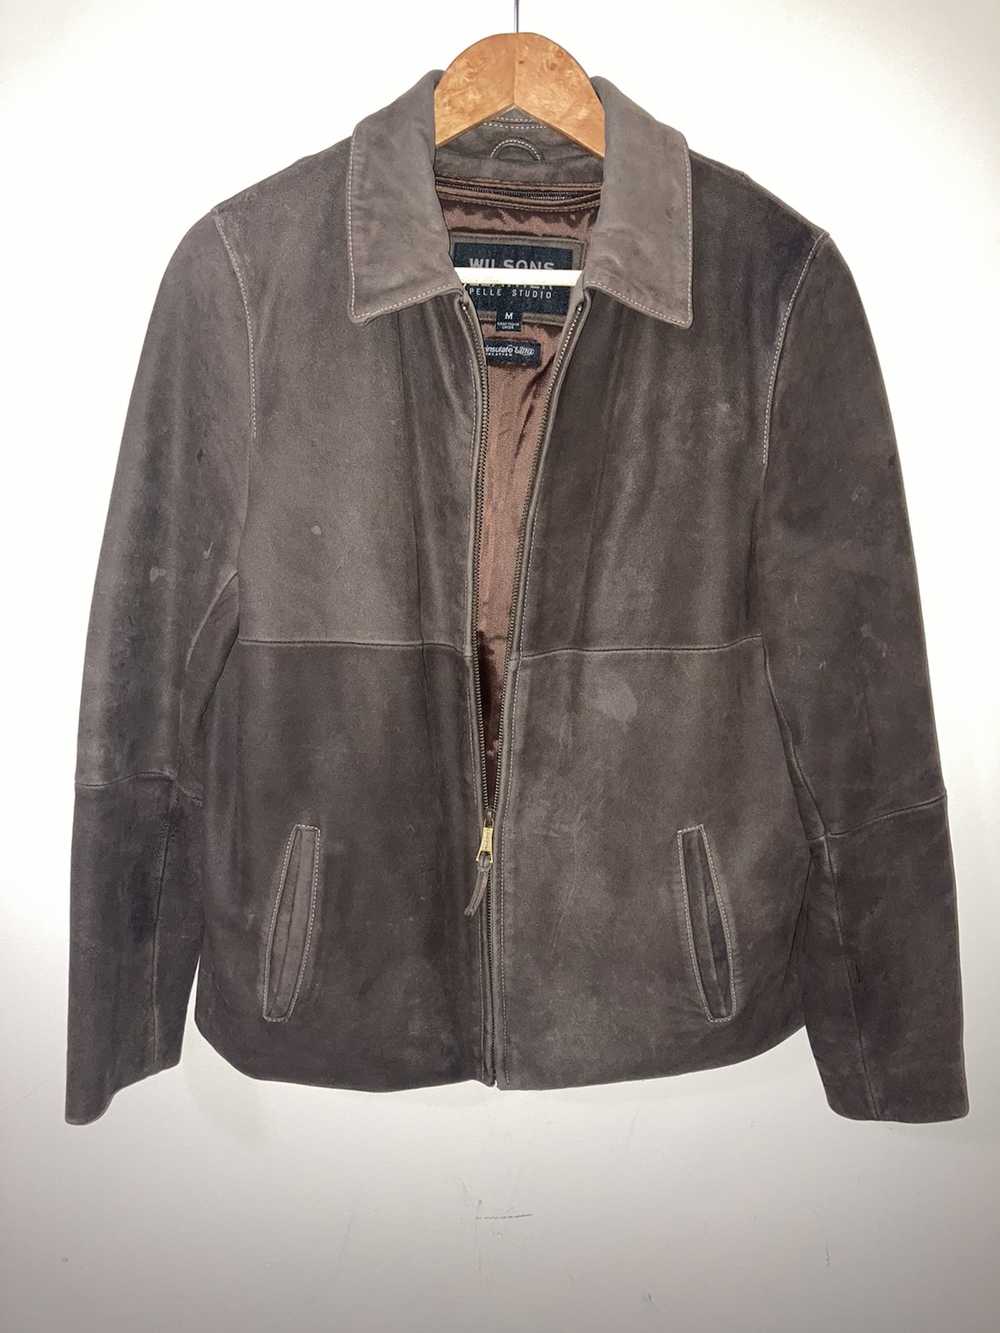 Wilsons Leather Wilsons Leather Jacket Size M - image 2